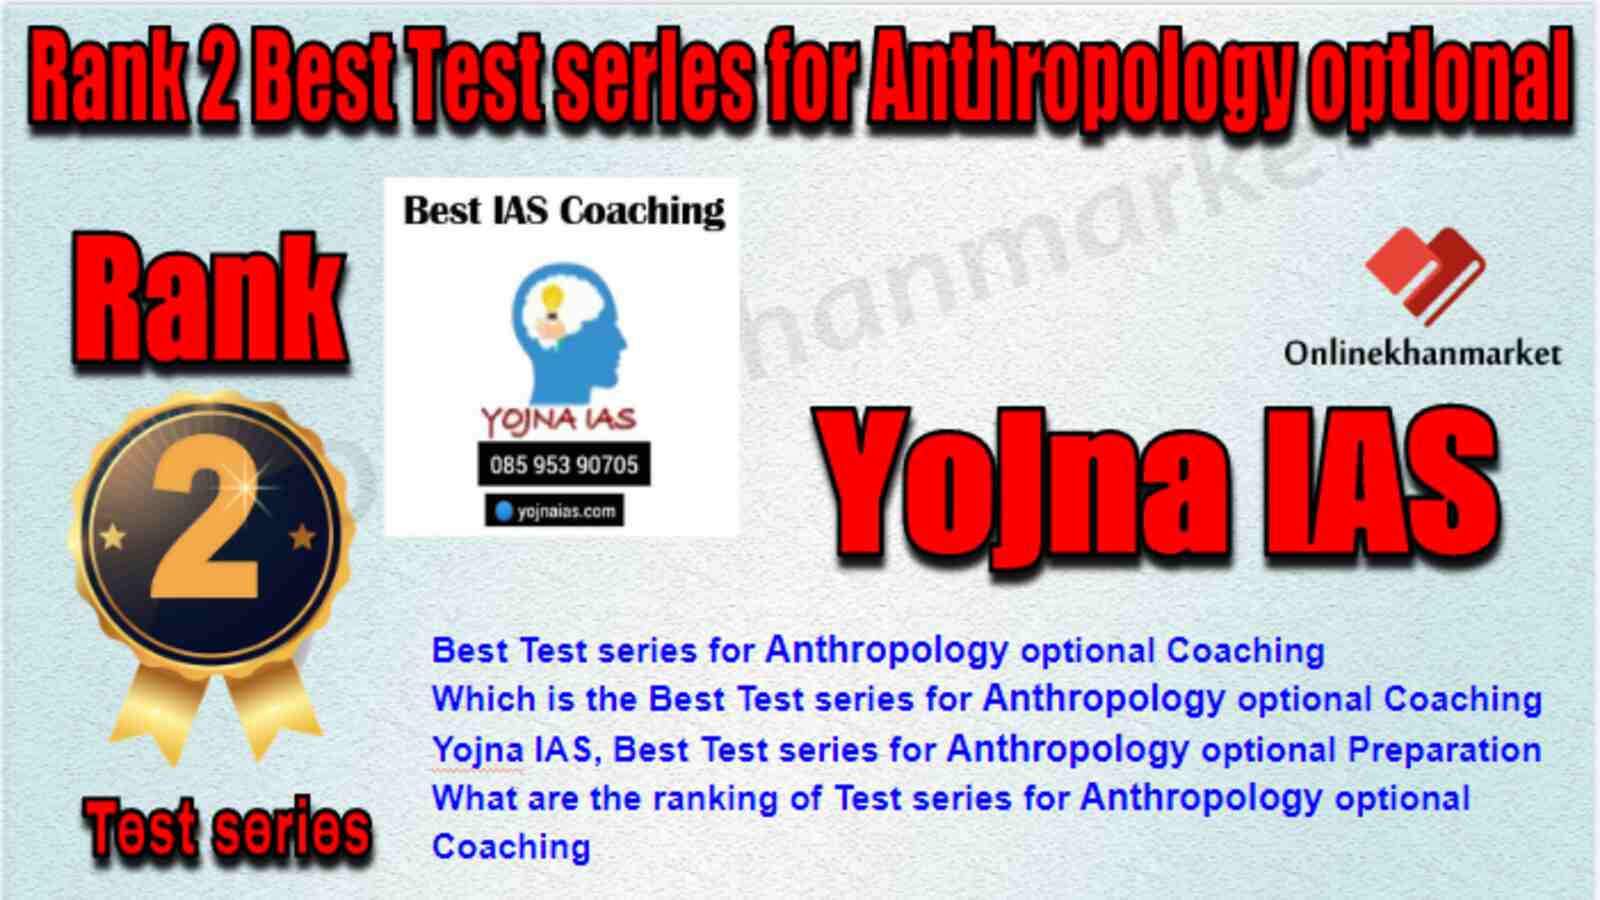 Rank 2 Best Test series for Anthropology optional